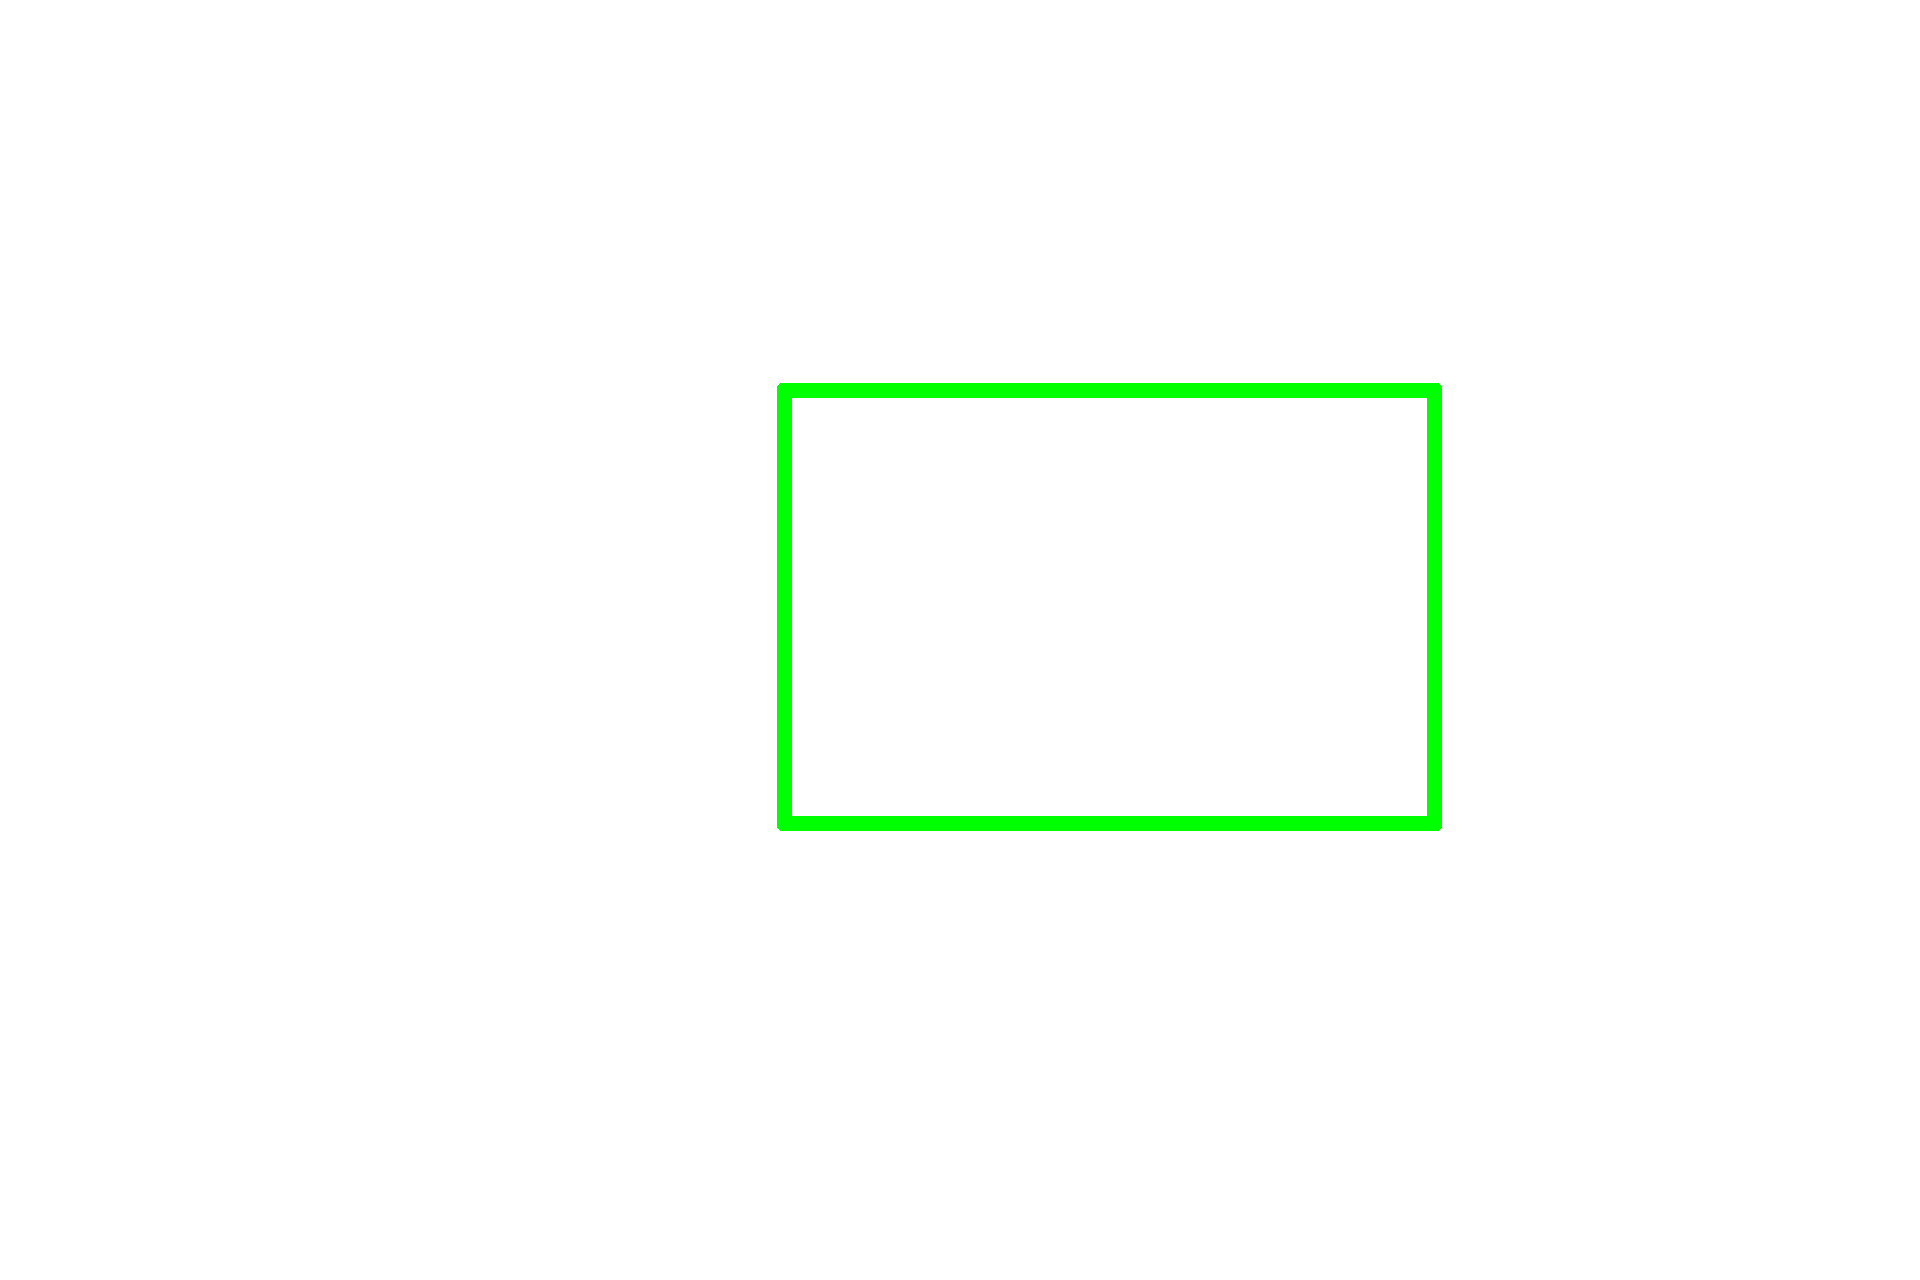 Next image <p>The next image shows the region in the rectangle at higher magnification.</p>
